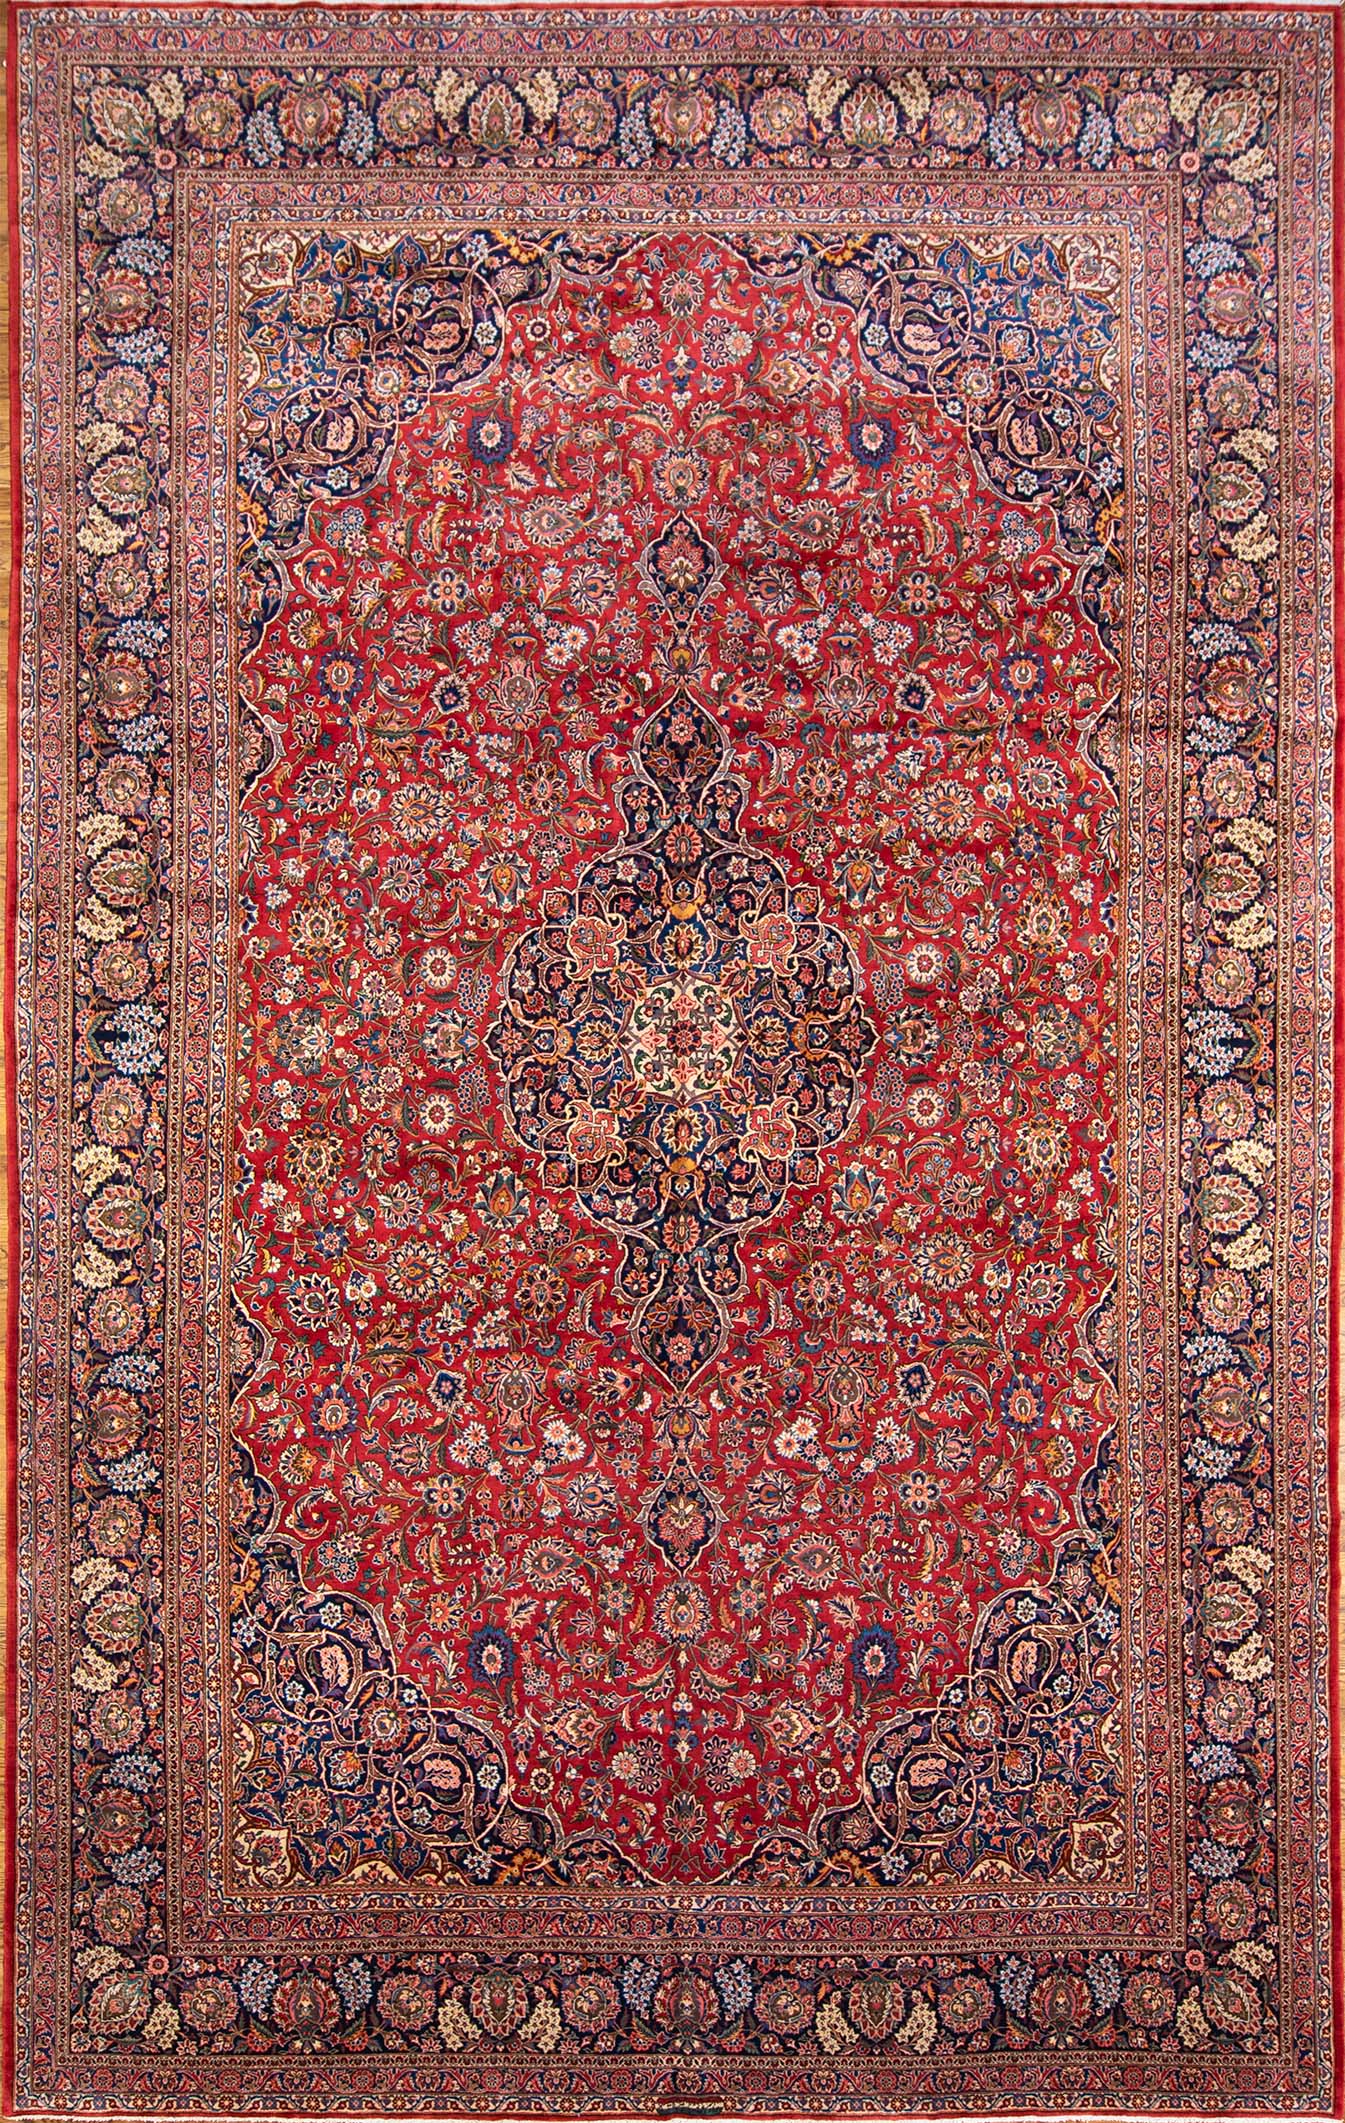 Antique Persian Kashan rug with red and navy-blue colors. Size11.5x18.2.